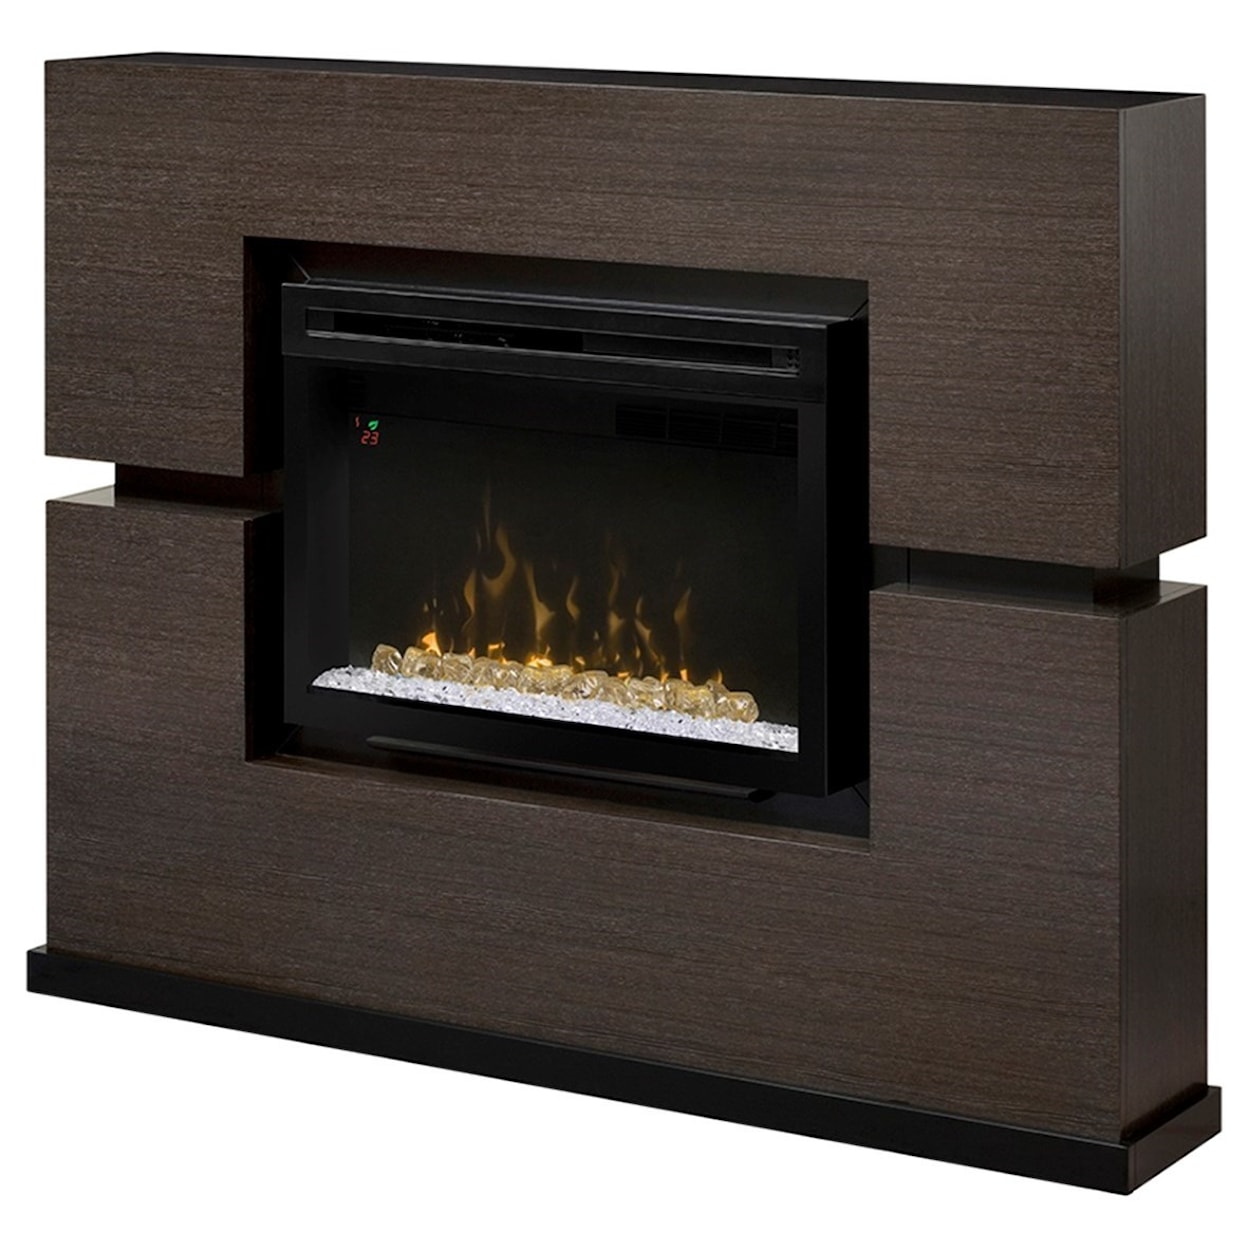 Dimplex Linwood Fireplace and Mantel